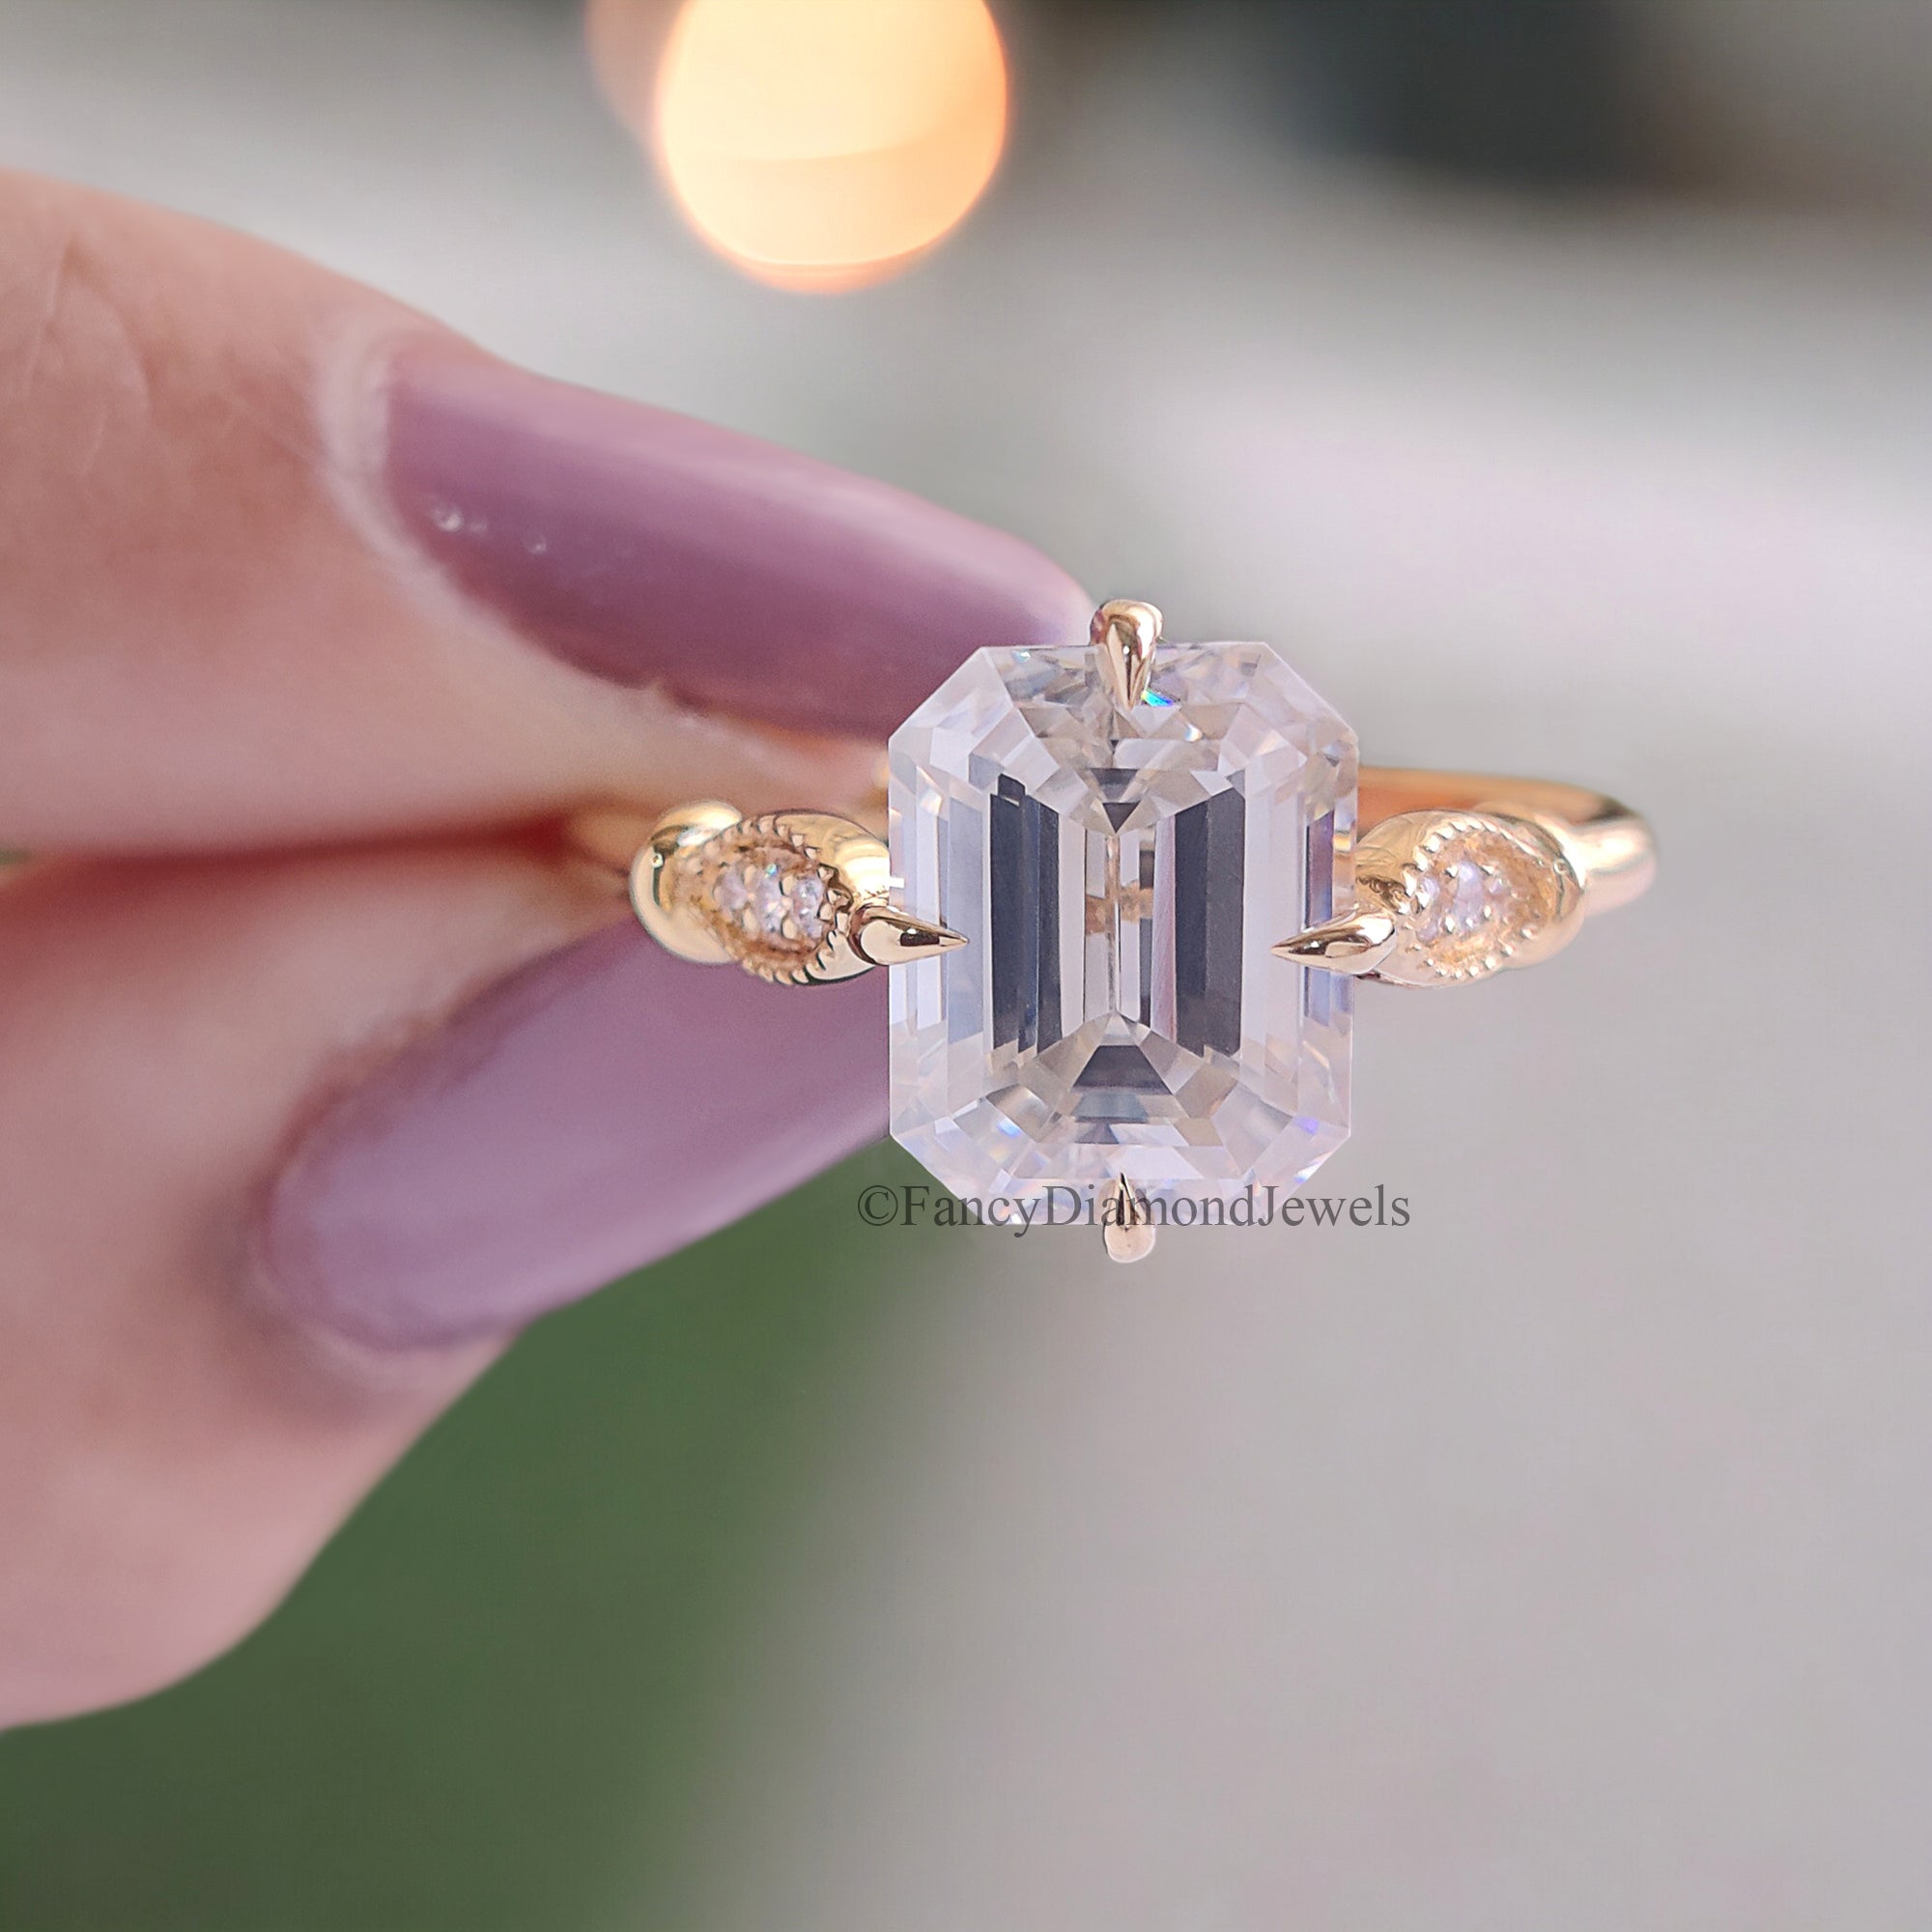 Antique Vintage 2.50 CT Emerald Cut Colorless Moissanite Engagement Ring Bridal Wedding Ring Milgrain Ring Anniversary Gifts For Her FD94